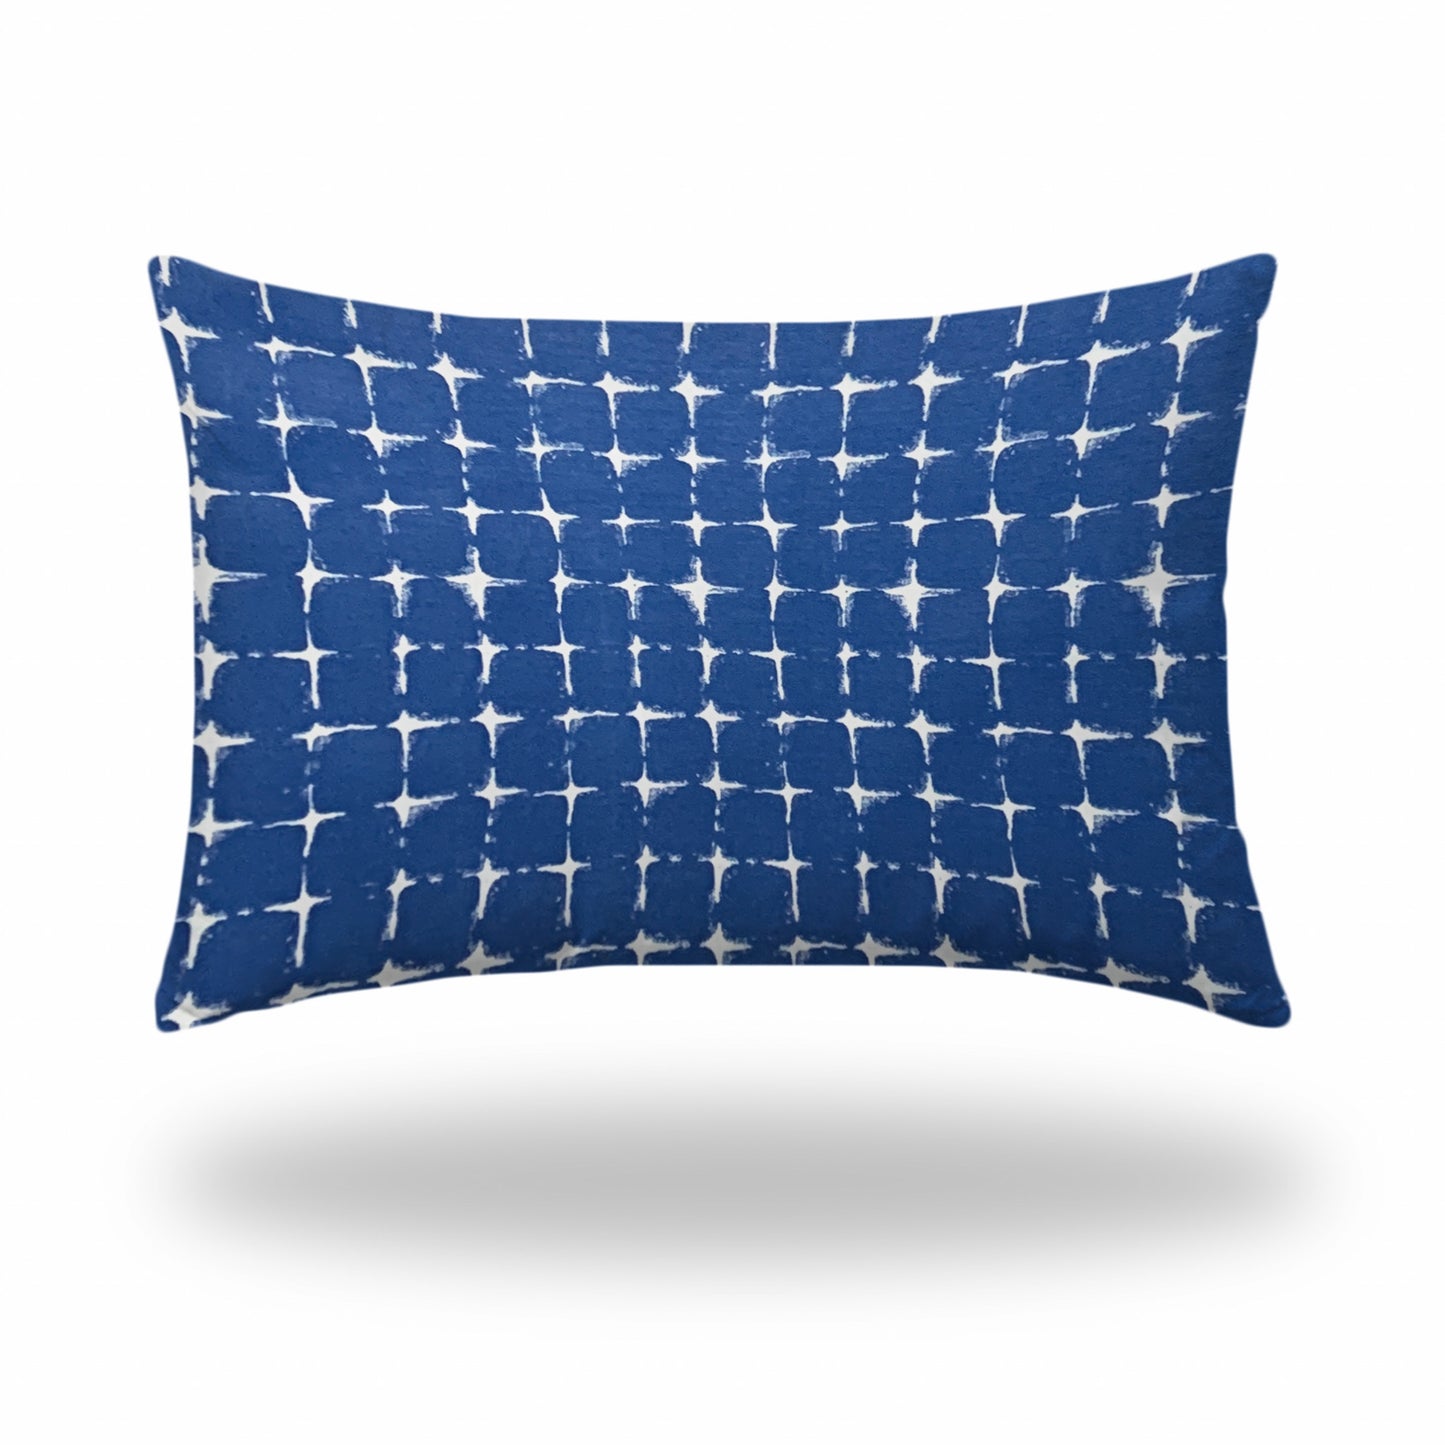 12" X 18" Blue And White Enveloped Gingham Lumbar Indoor Outdoor Pillow